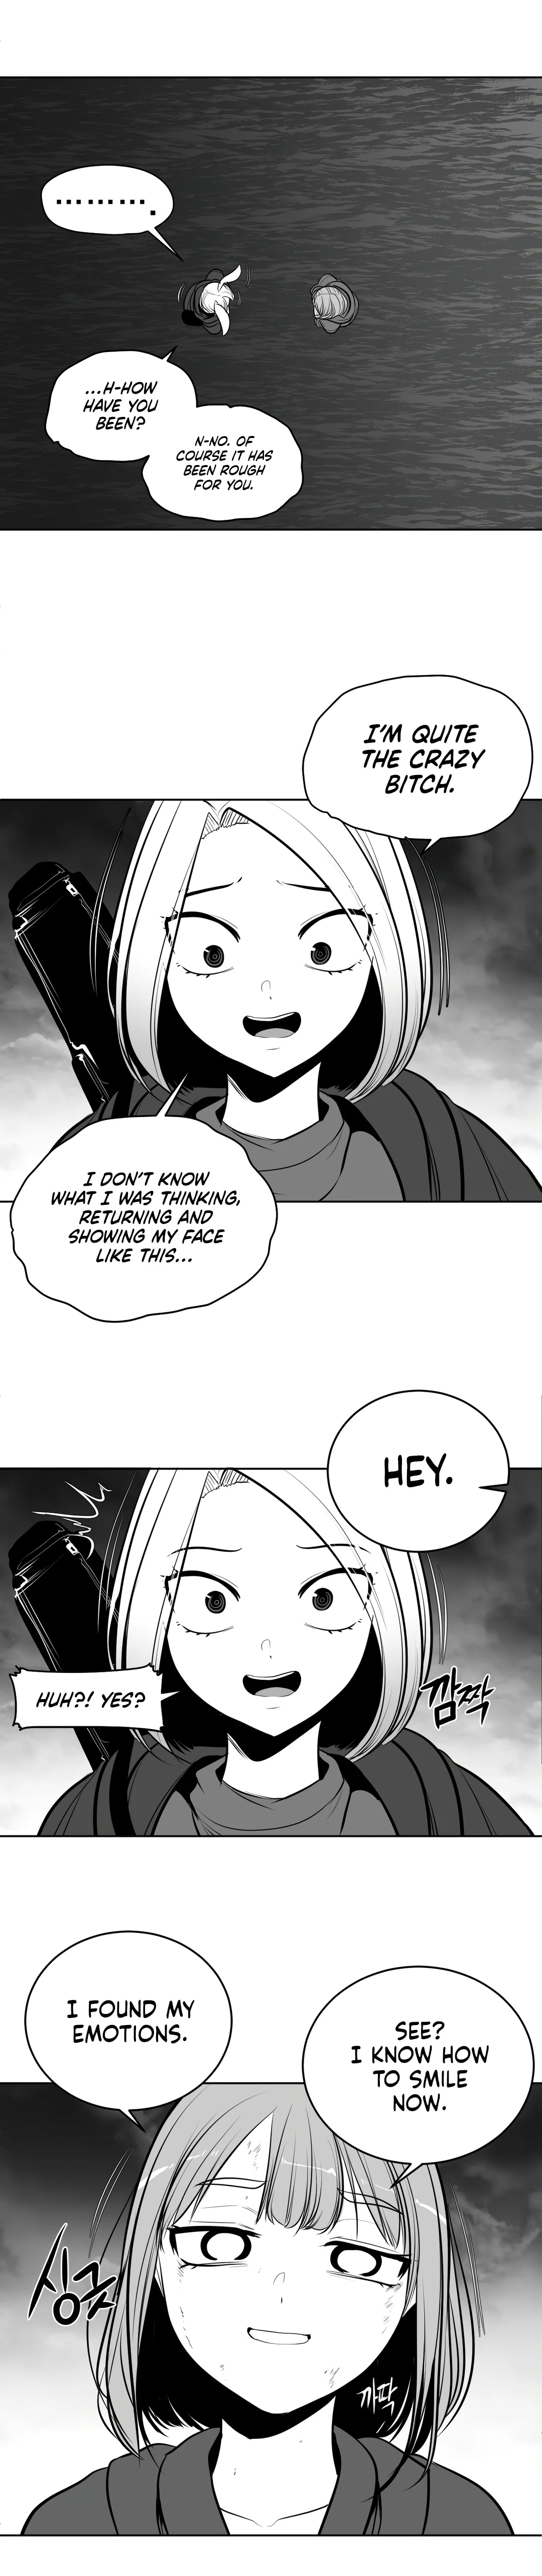 What Happens Inside The Dungeon - Page 5